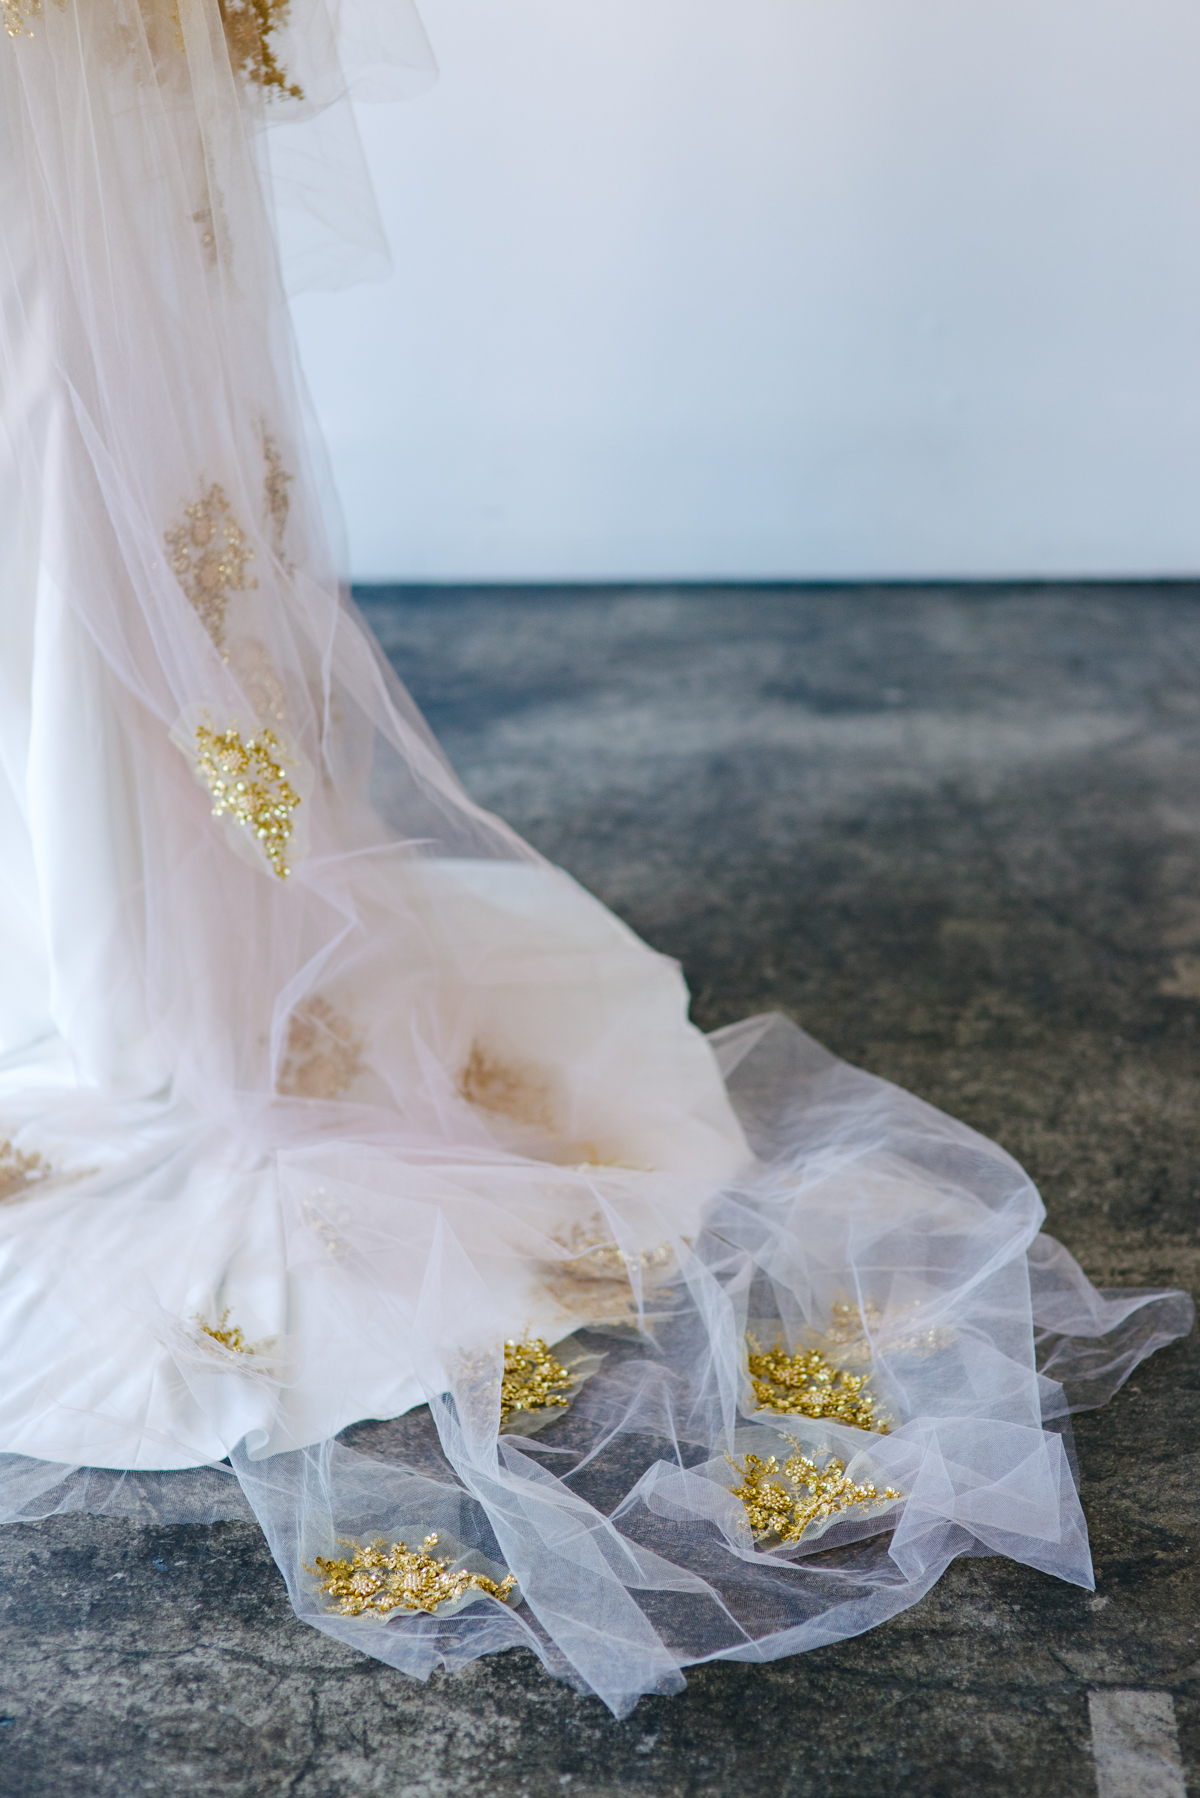 Close up of gold appliqués attached to a wedding veil